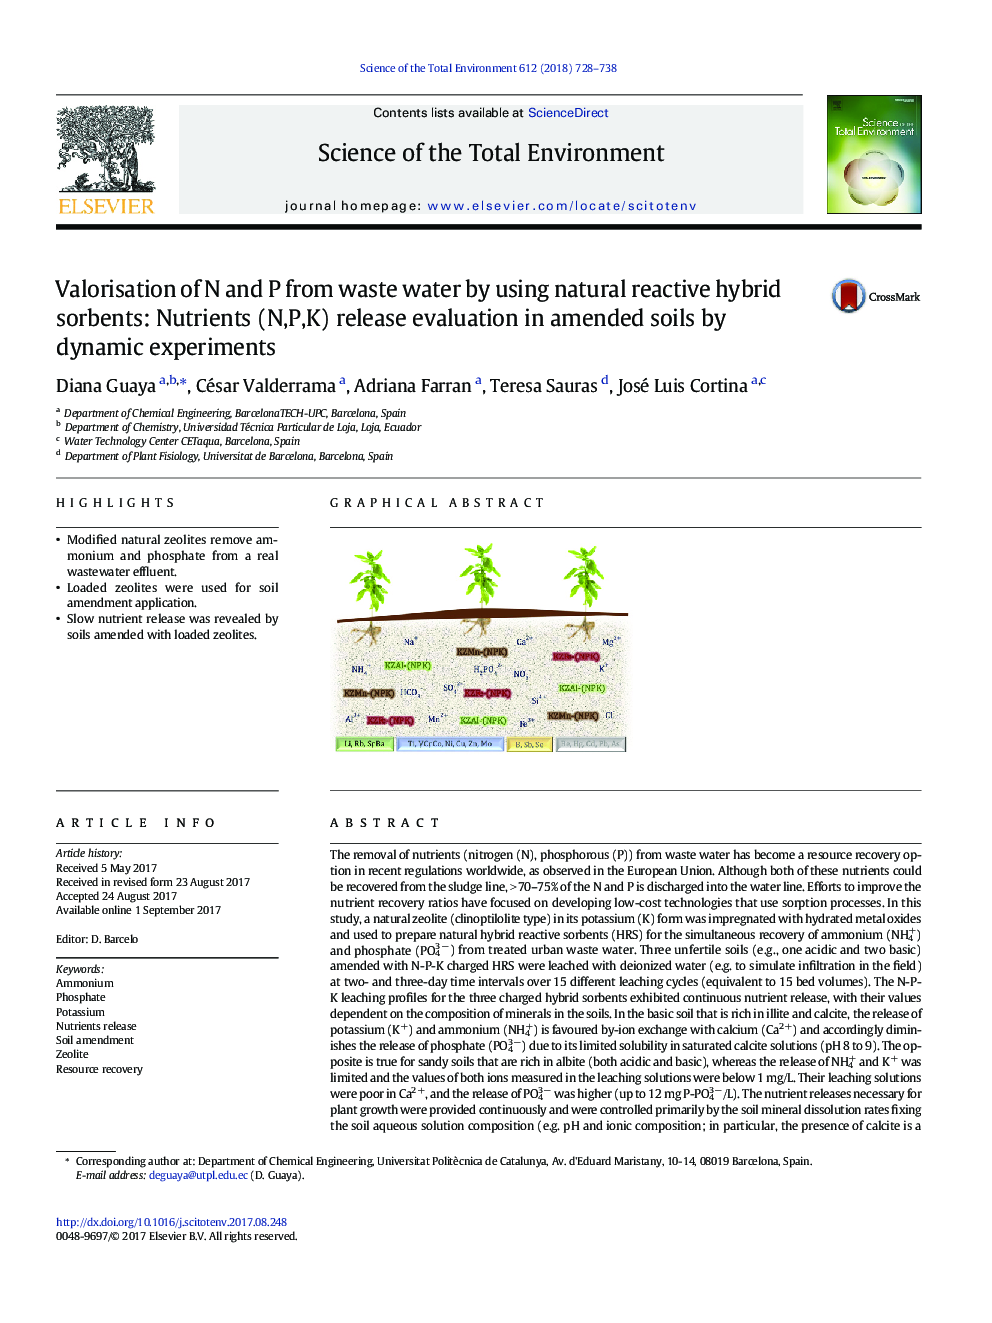 Valorisation of N and P from waste water by using natural reactive hybrid sorbents: Nutrients (N,P,K) release evaluation in amended soils by dynamic experiments